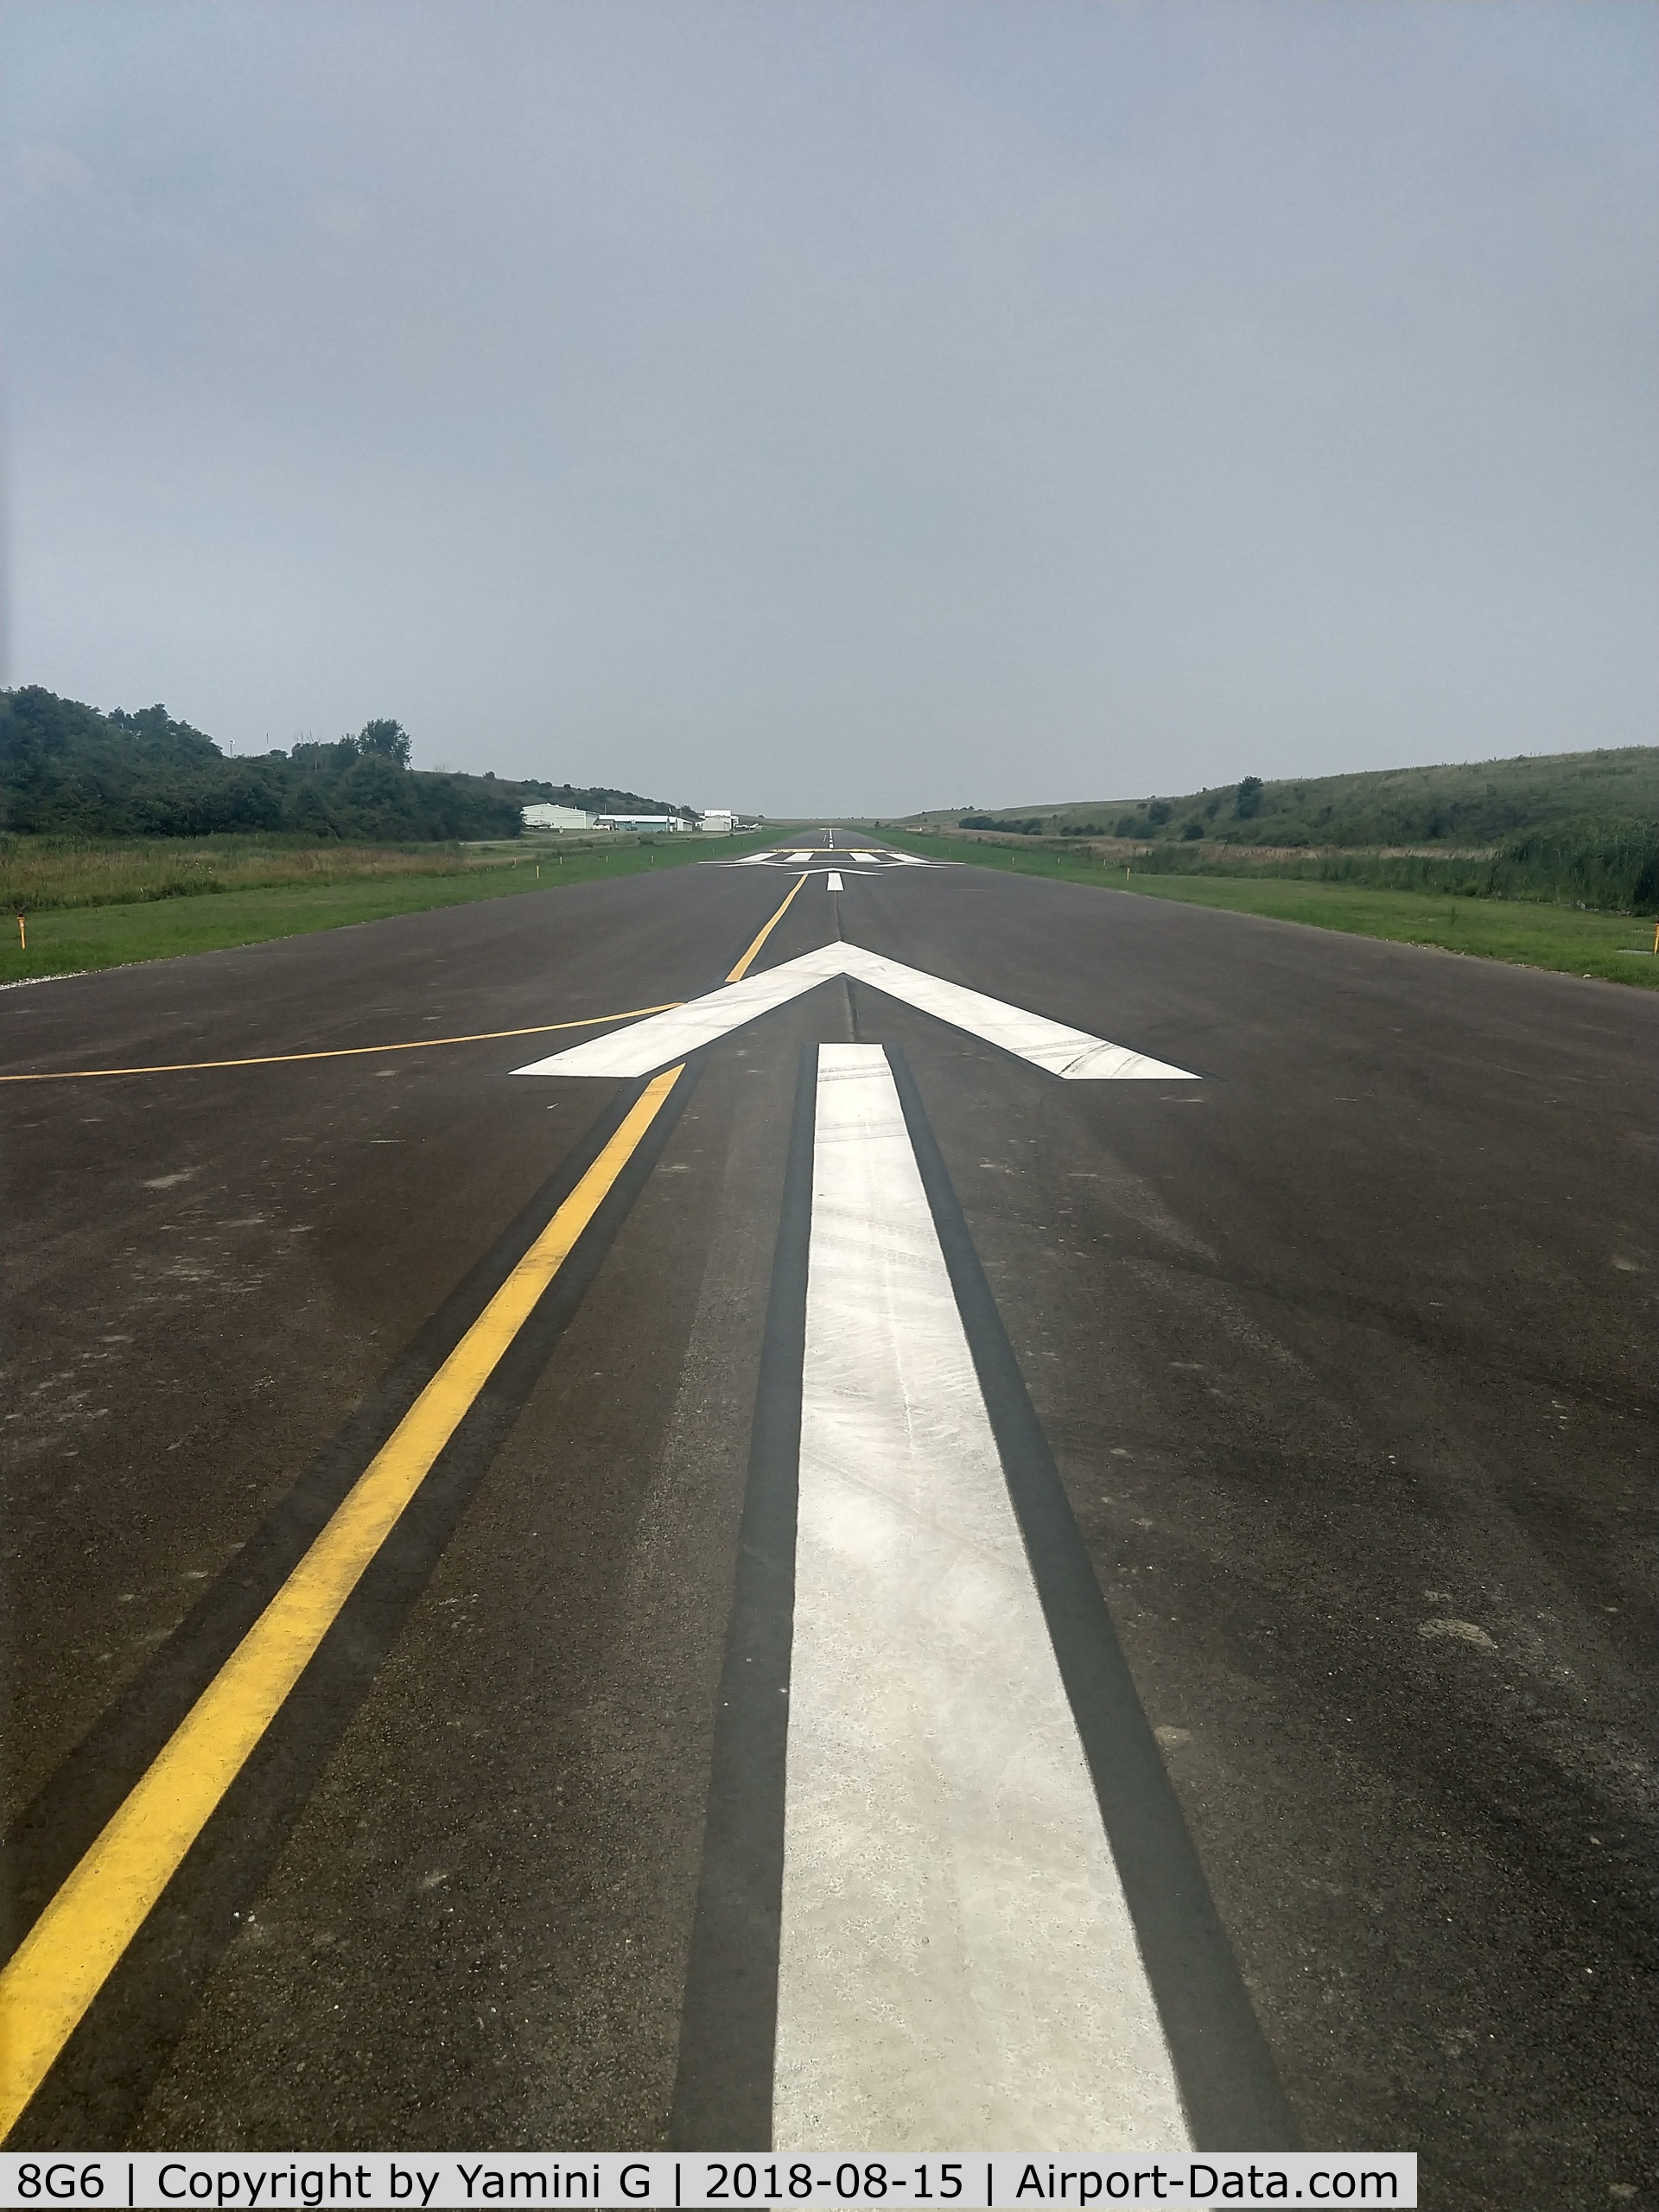 Harrison County Airport (8G6) - New Runway 13-31 (August 2018) 